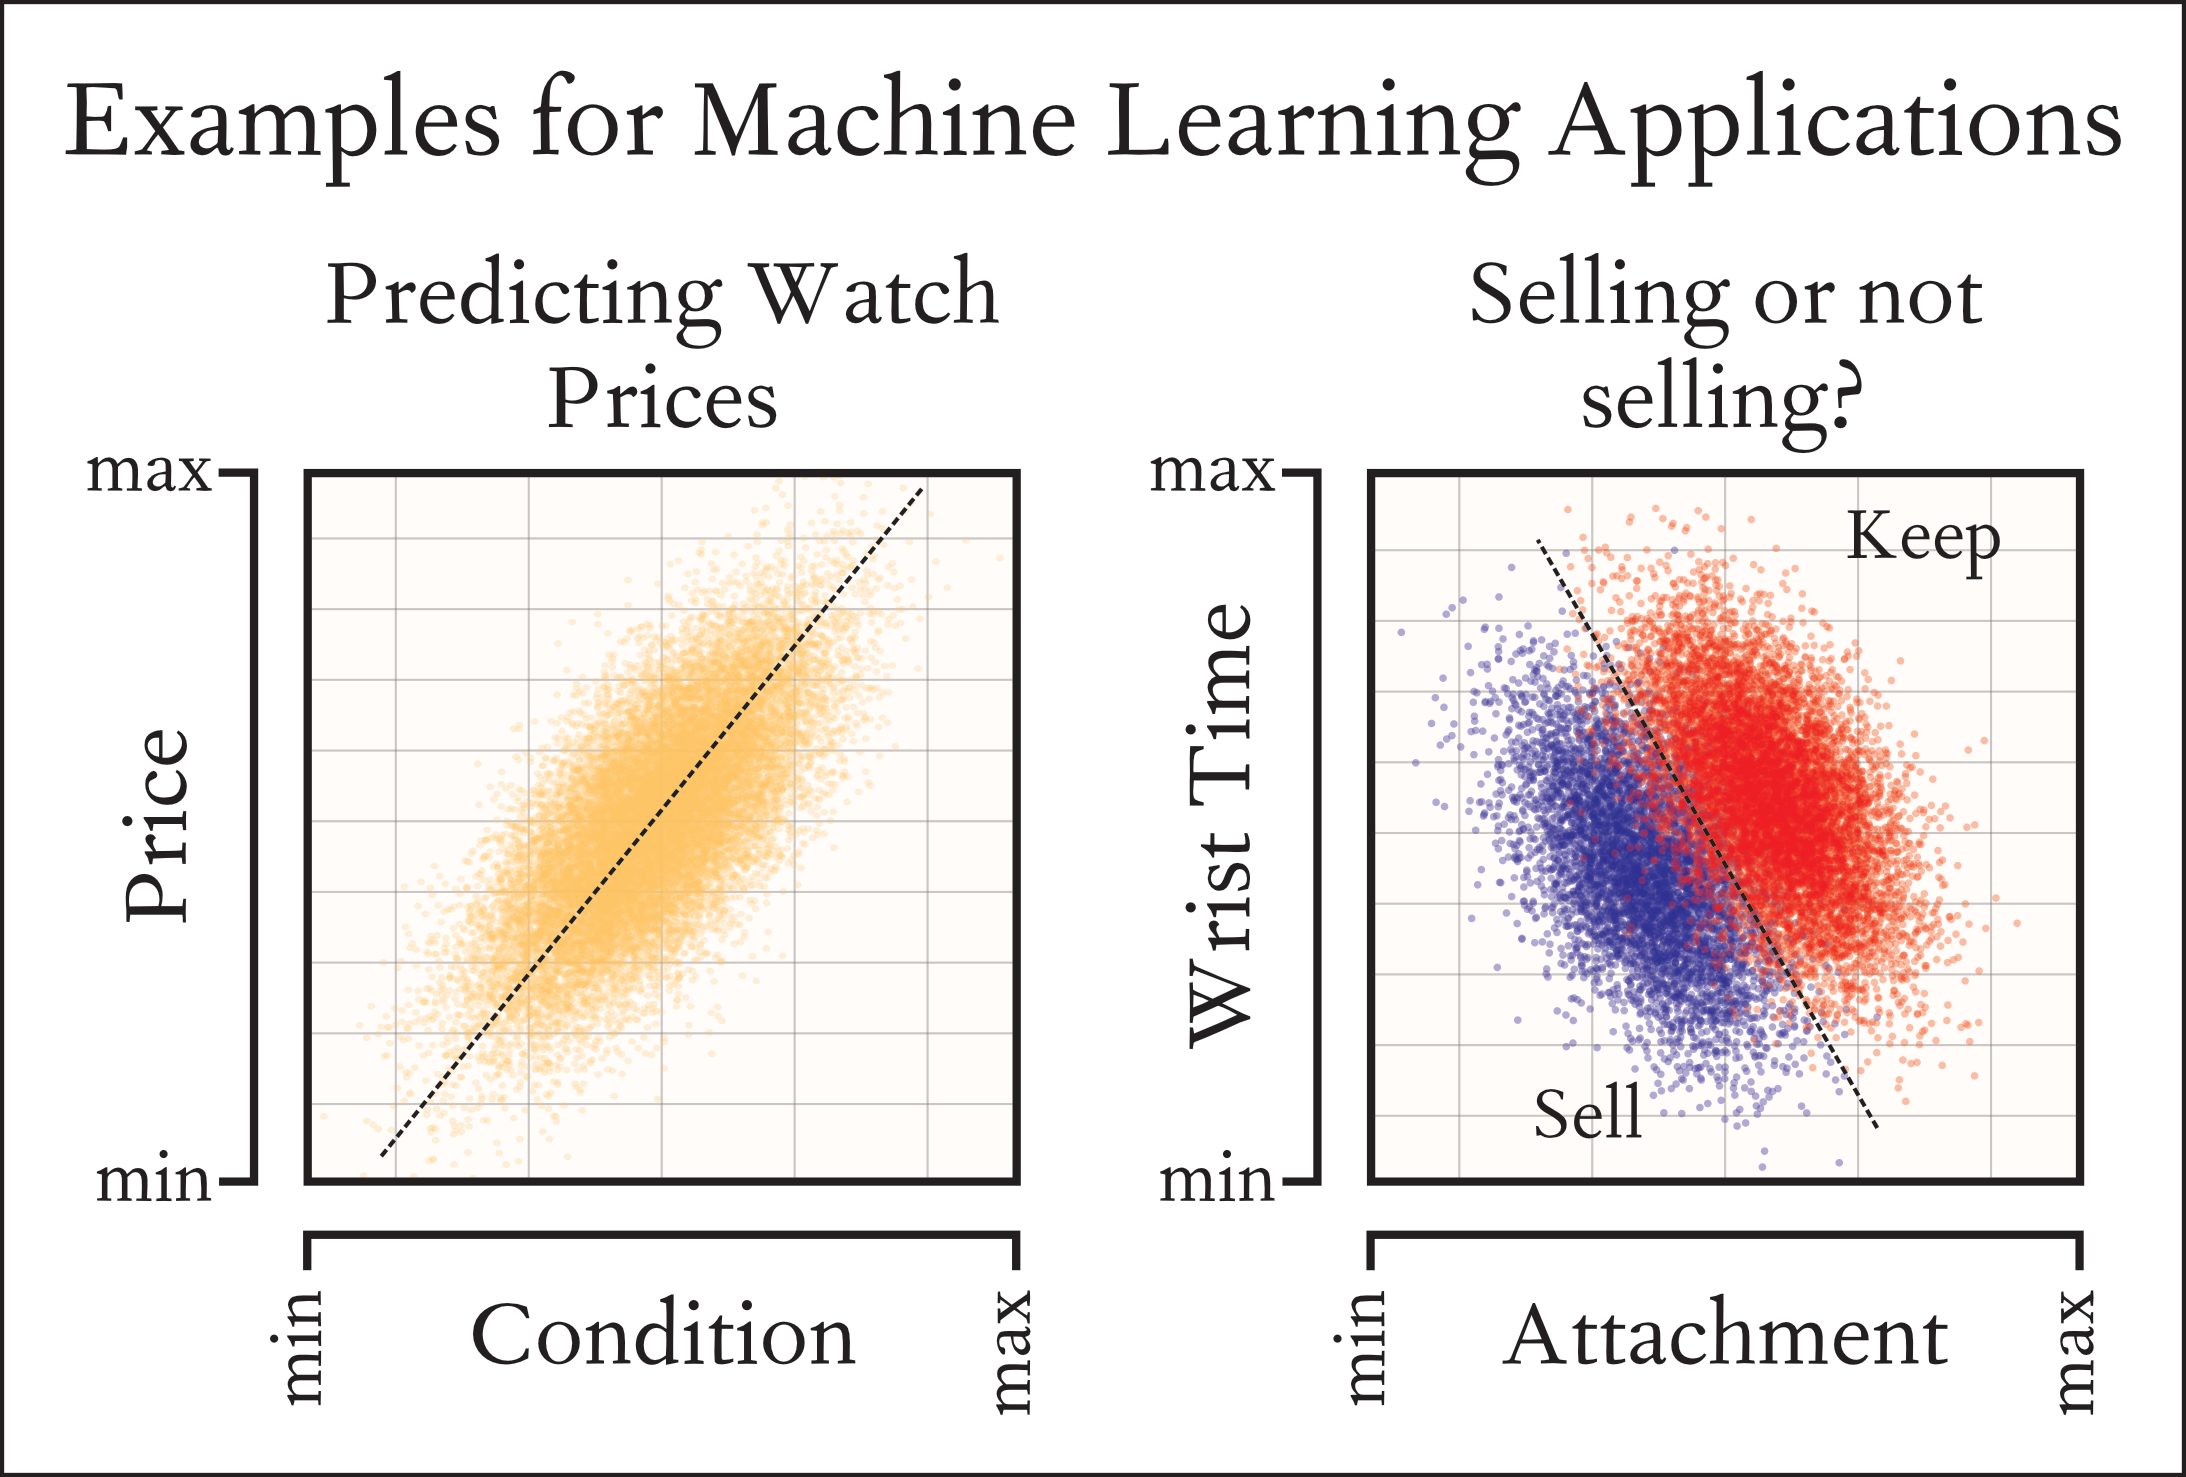 Toy examples visualizing what data machine learning and Artificial Intelligence in Watches could be used for